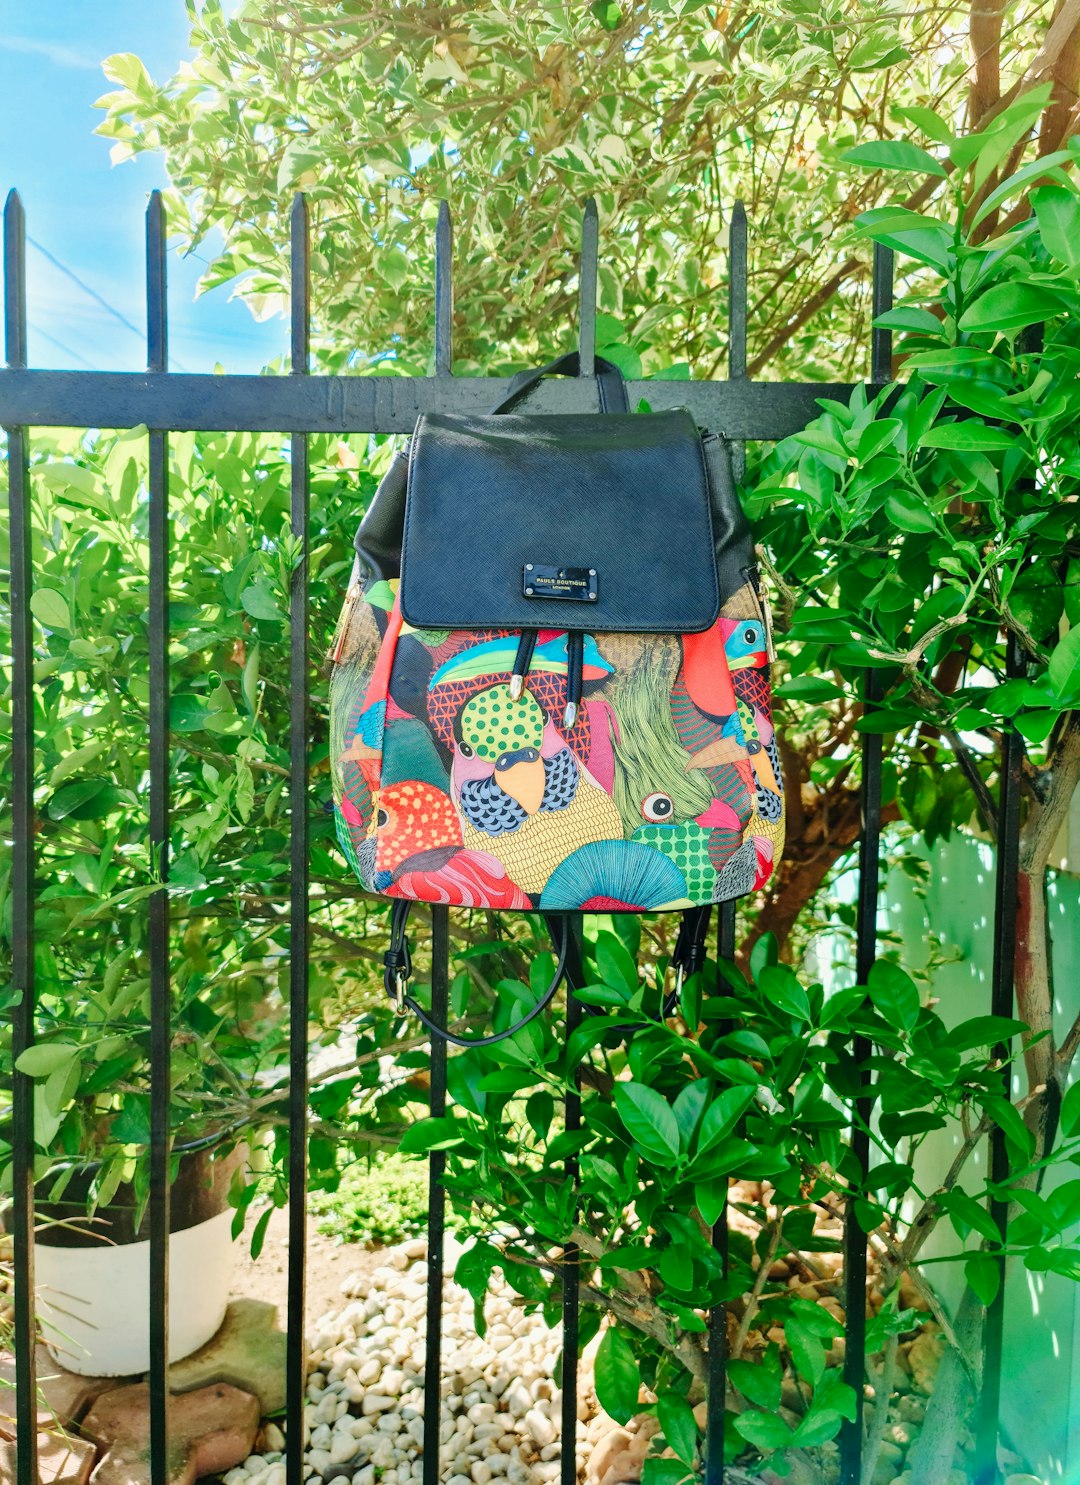 black and pink backpack hanged on green metal fence